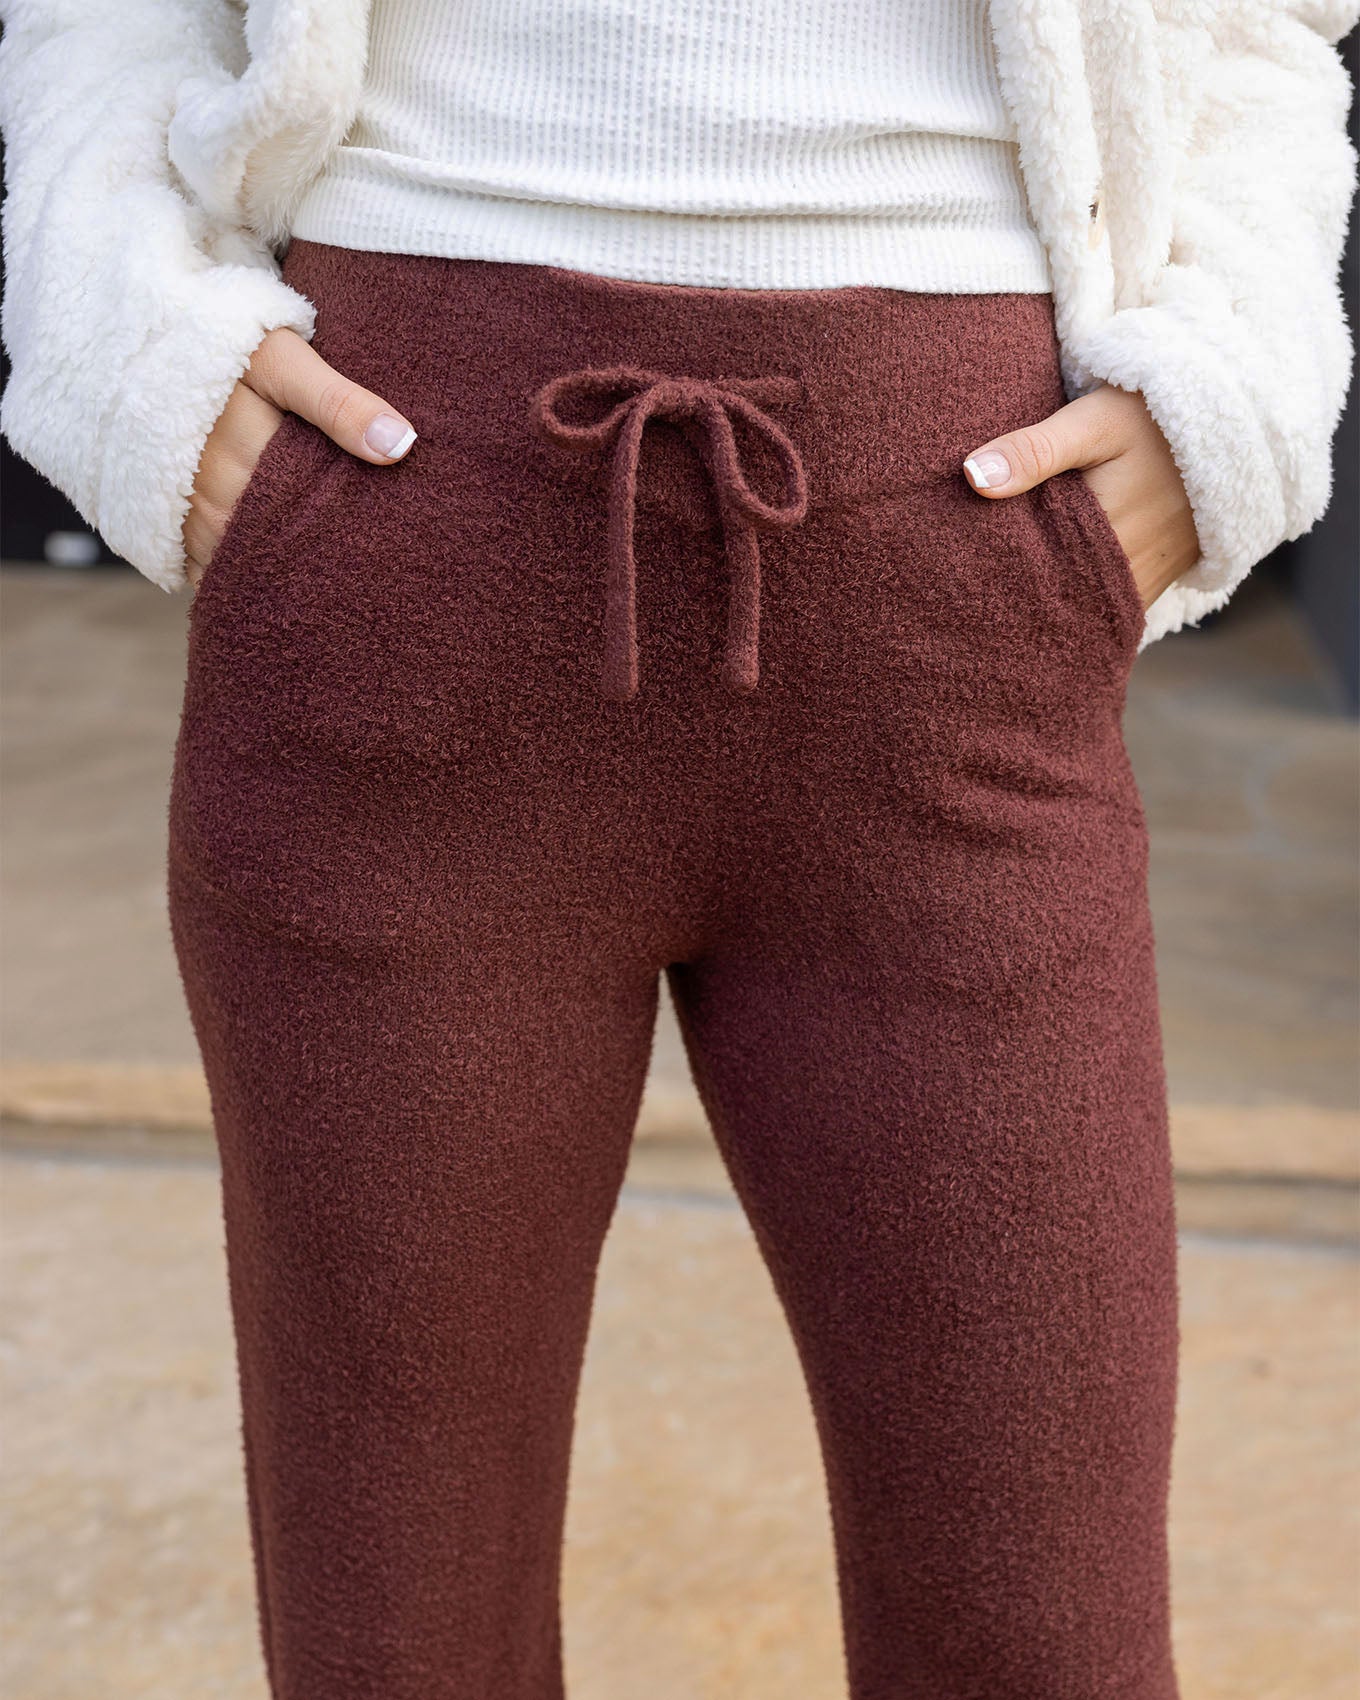 Cherry Red Pants